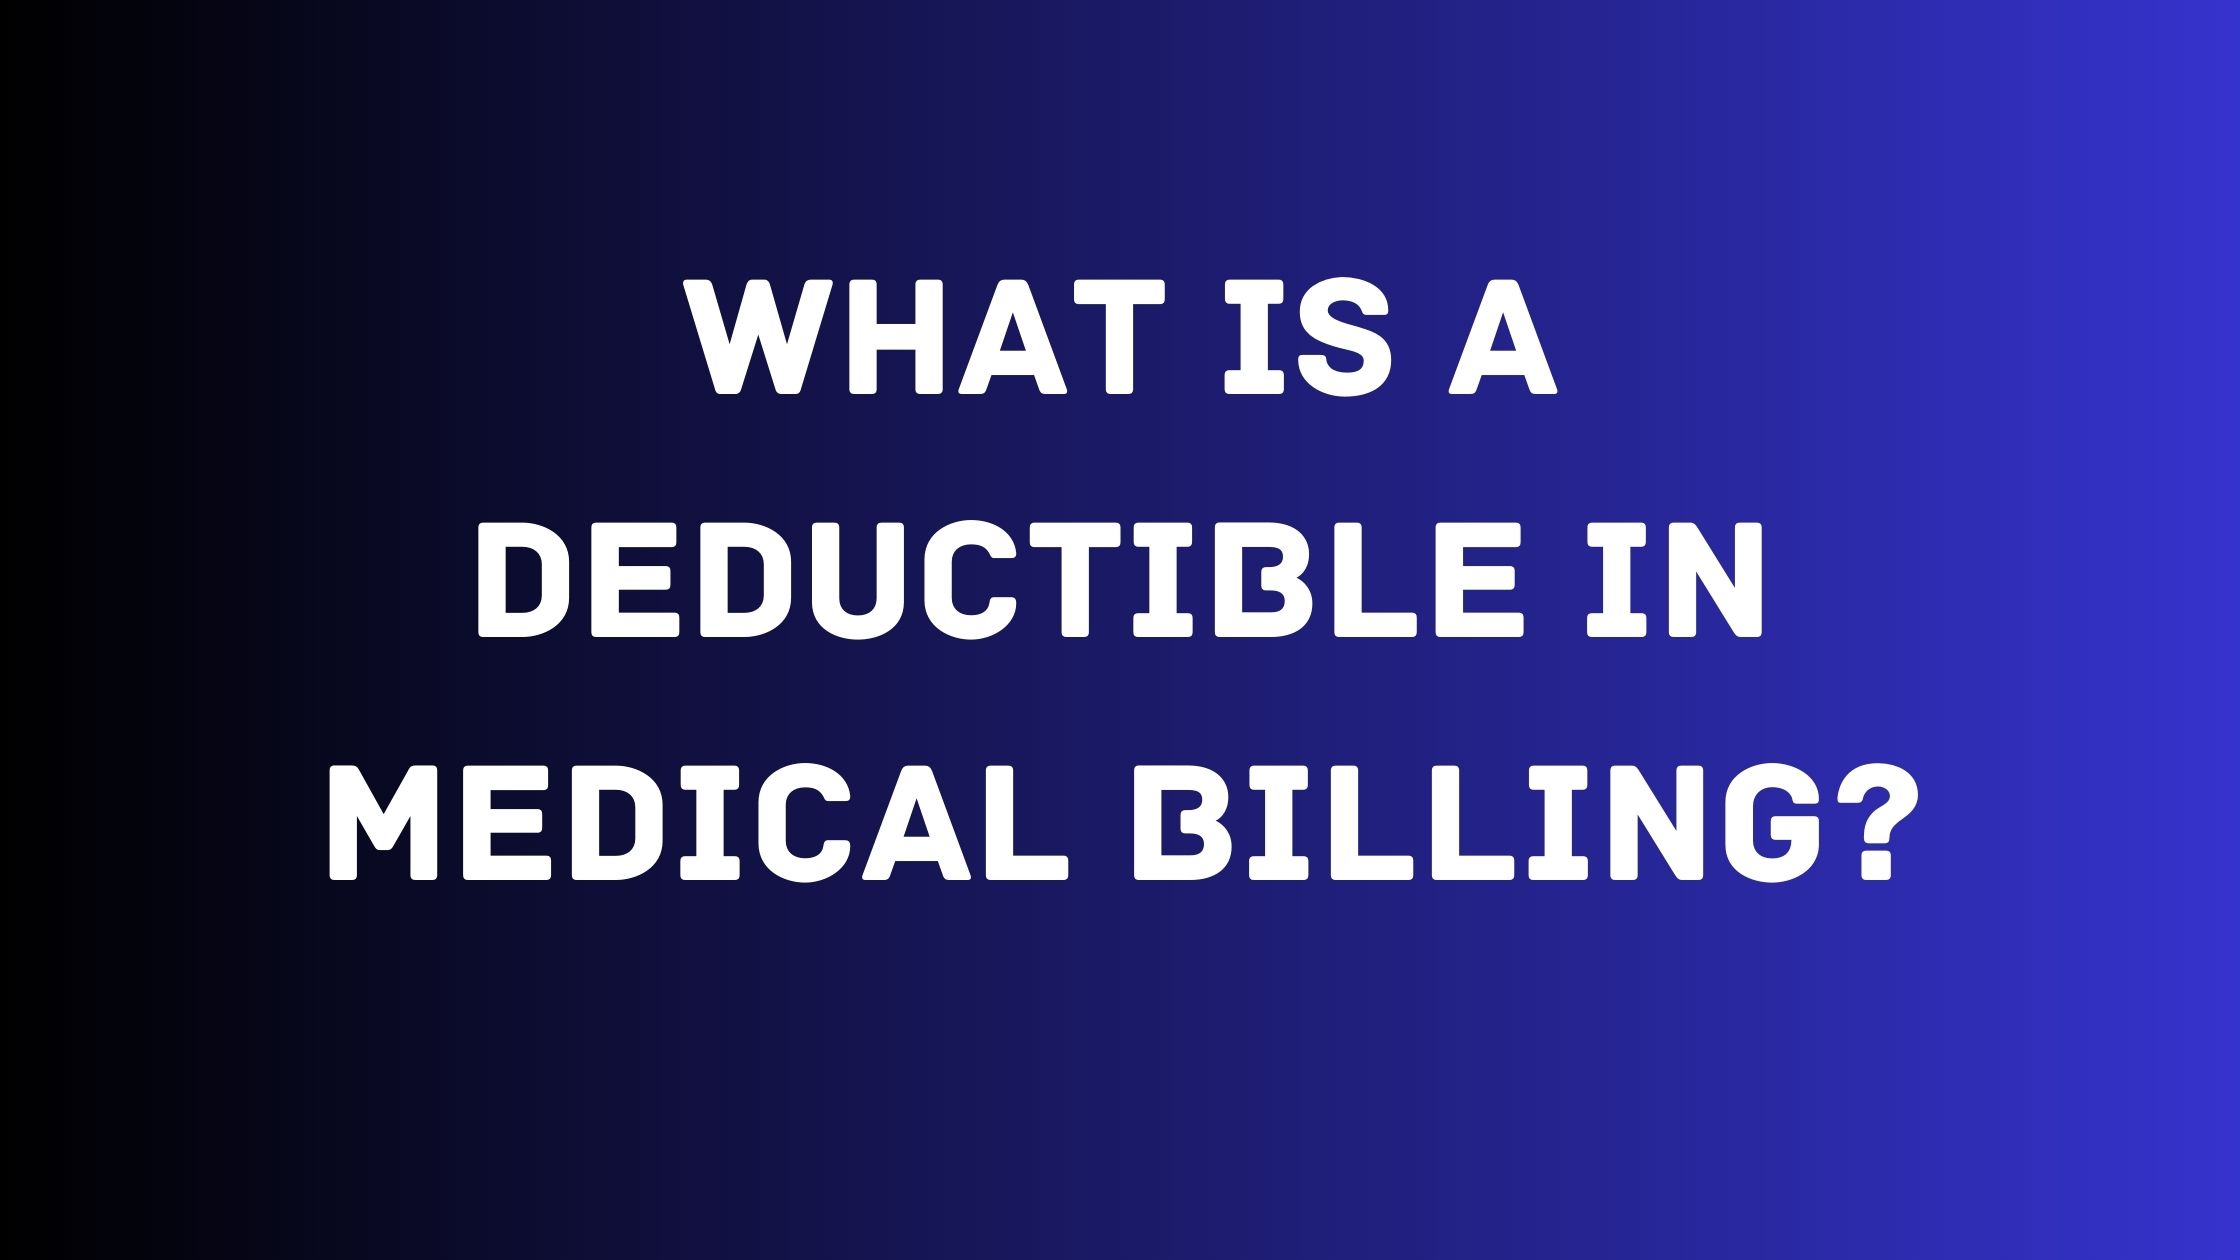 what is a deductible in Medical billing?